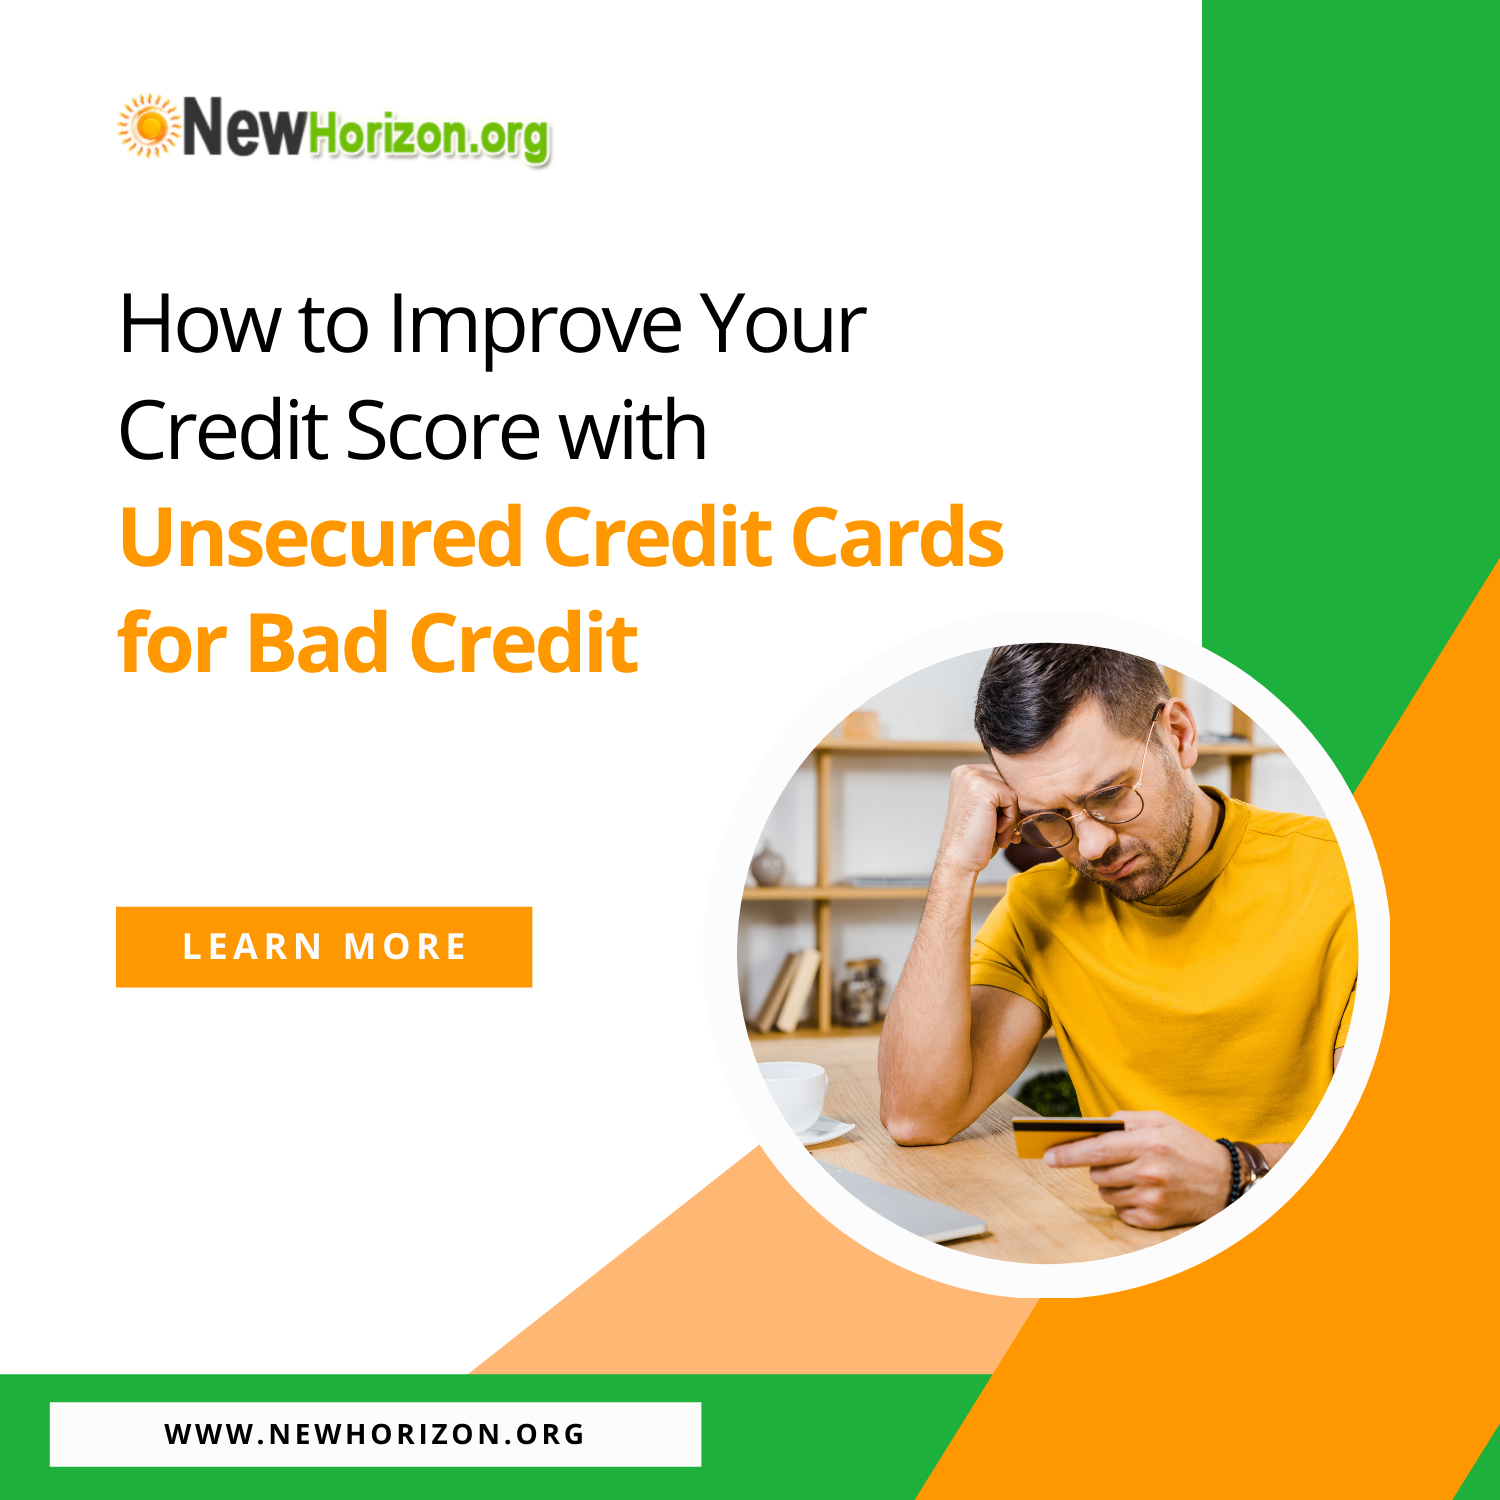 How to improve your credit score with unsecured credit cards for bad credit